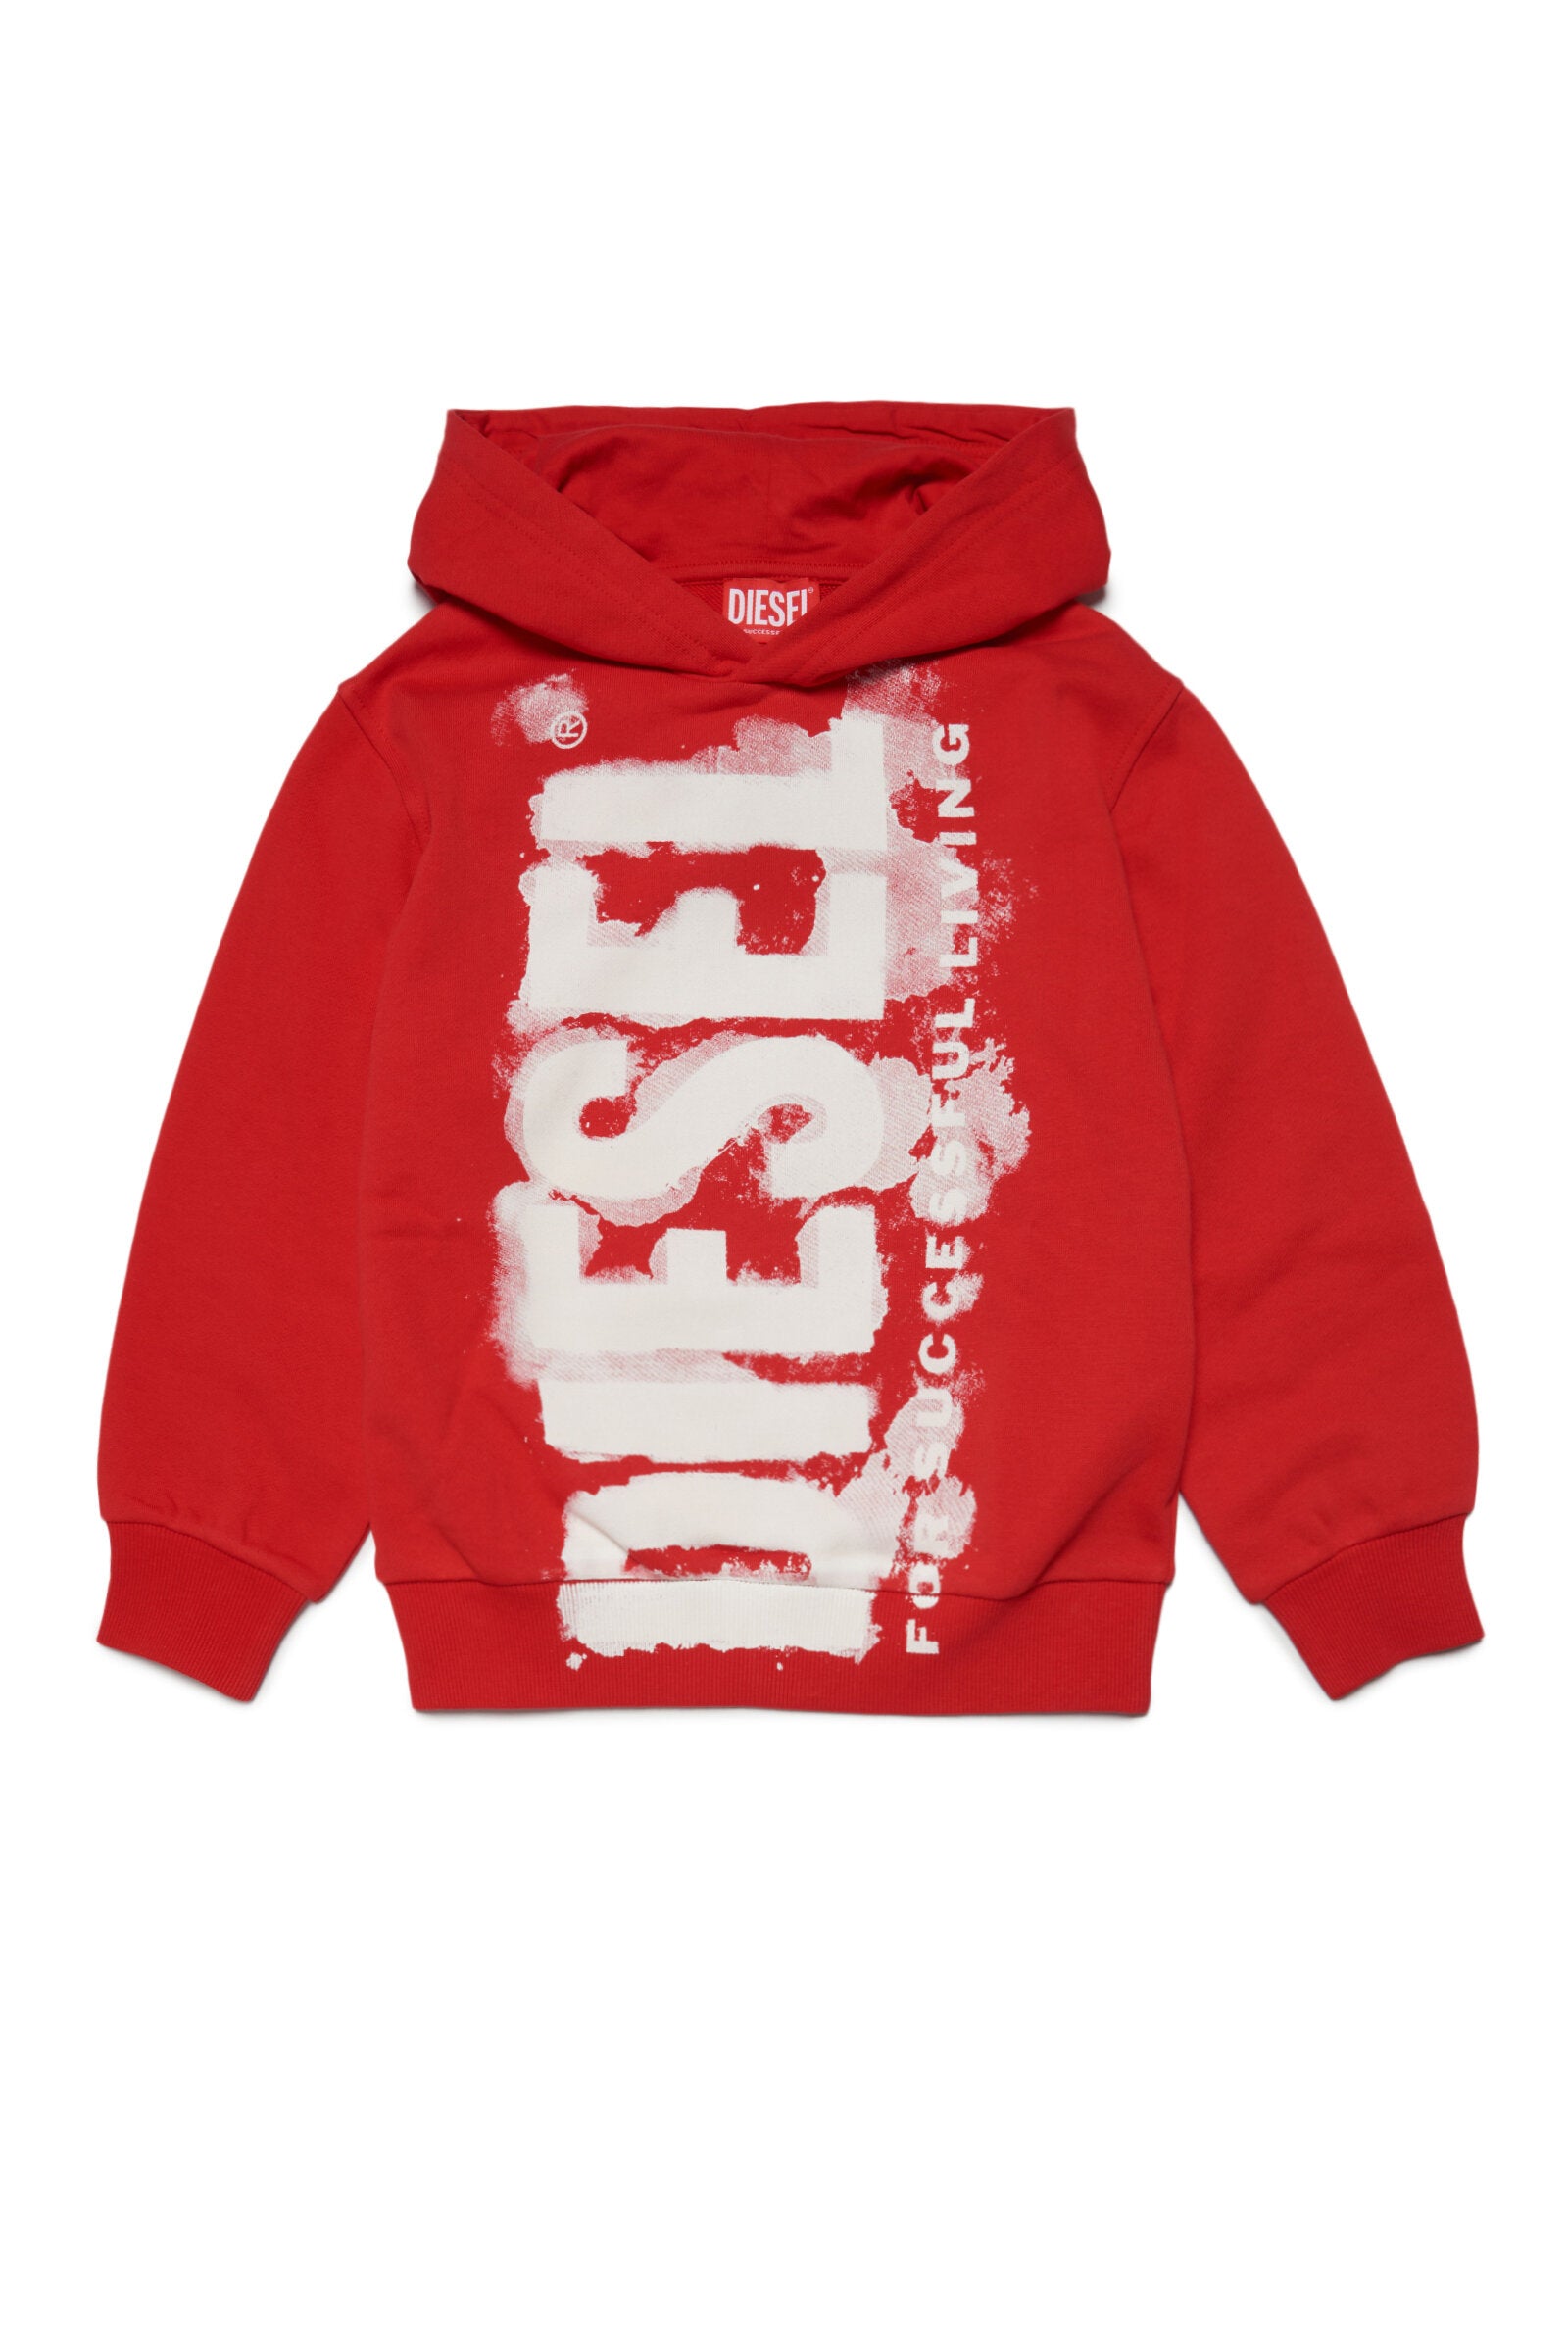 Diesel red hooded sweatshirt with watercolour effect logo for children |  Brave Kid